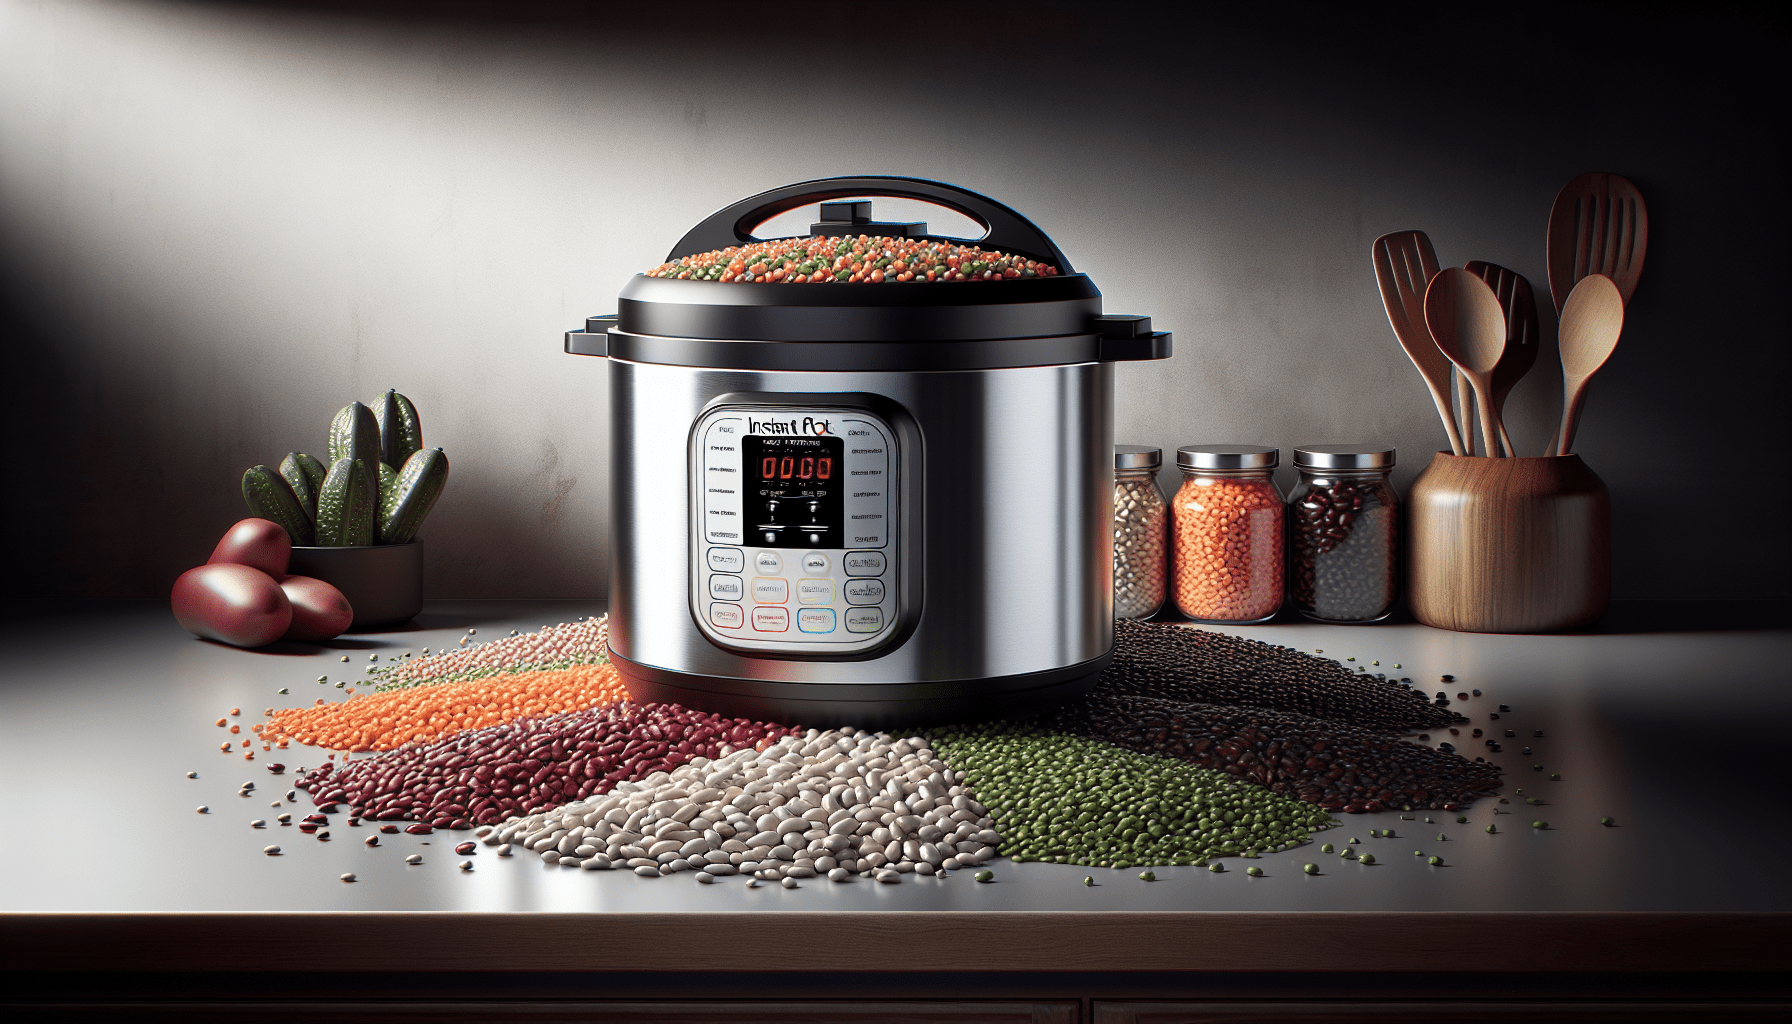 Cooking Beans And Lentils In The Instant Pot